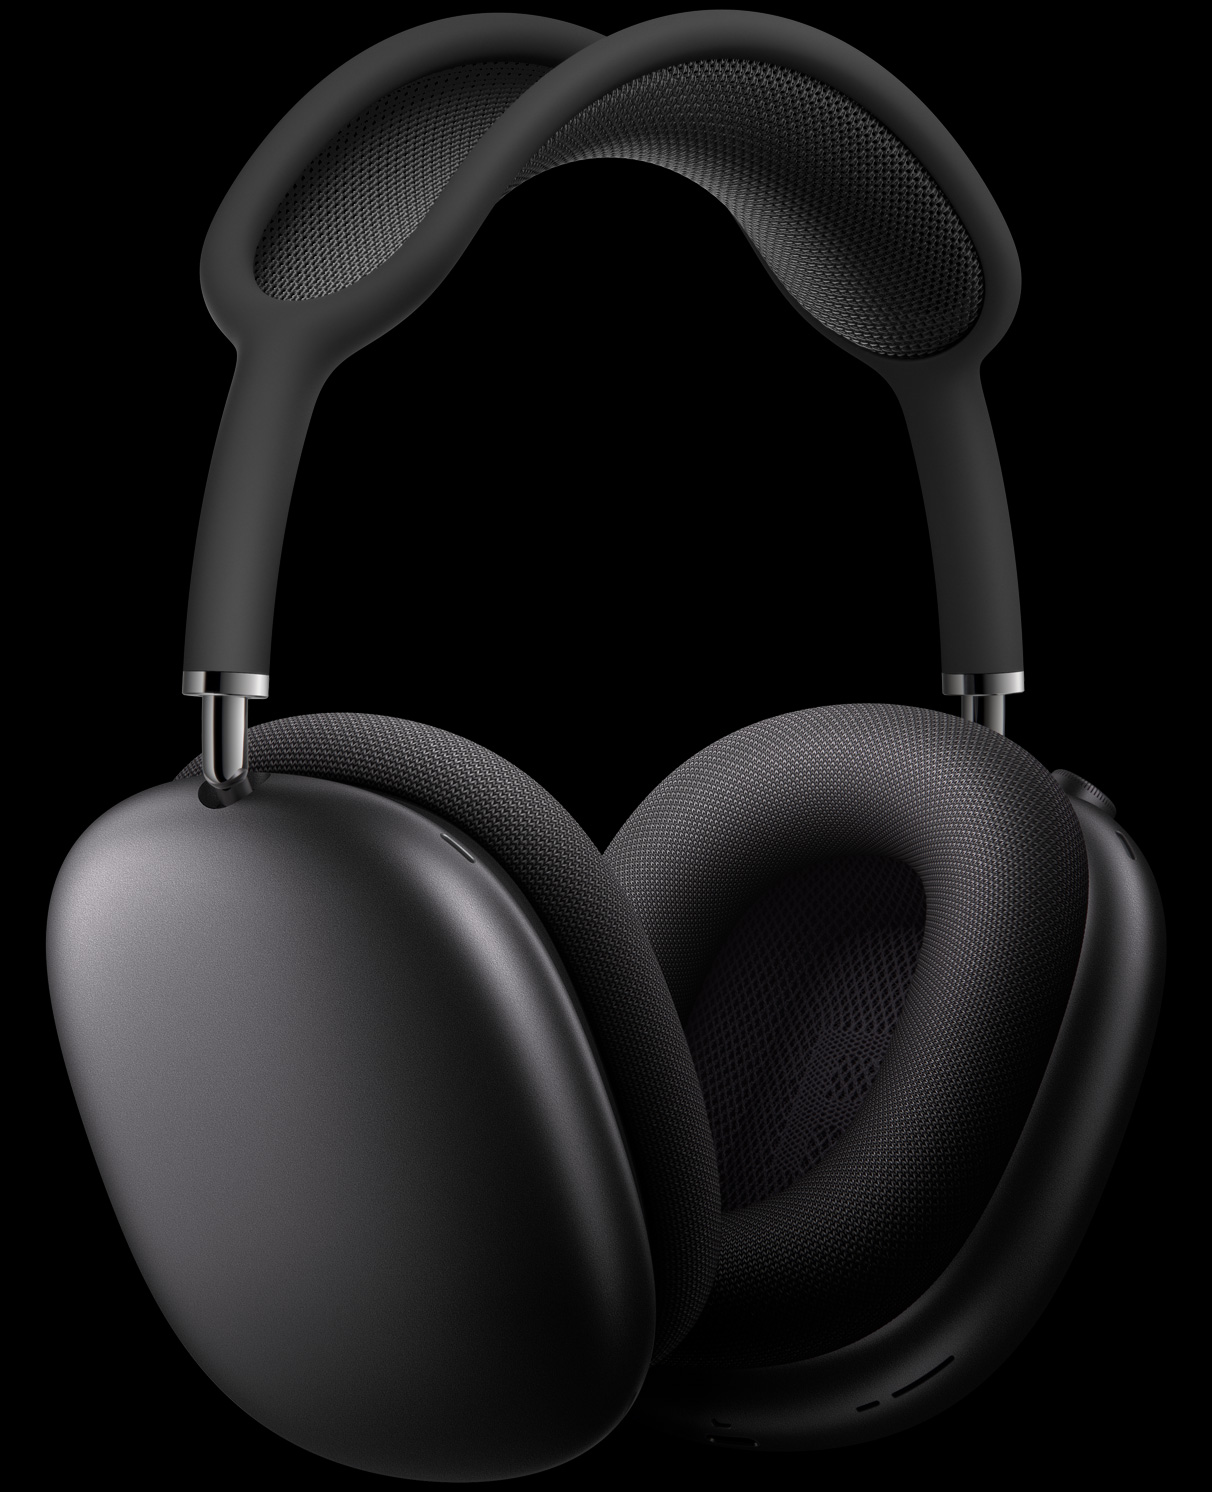 AirPods Max in Space Grey at three-quarter perspective, with external microphones relieved into ear cups.